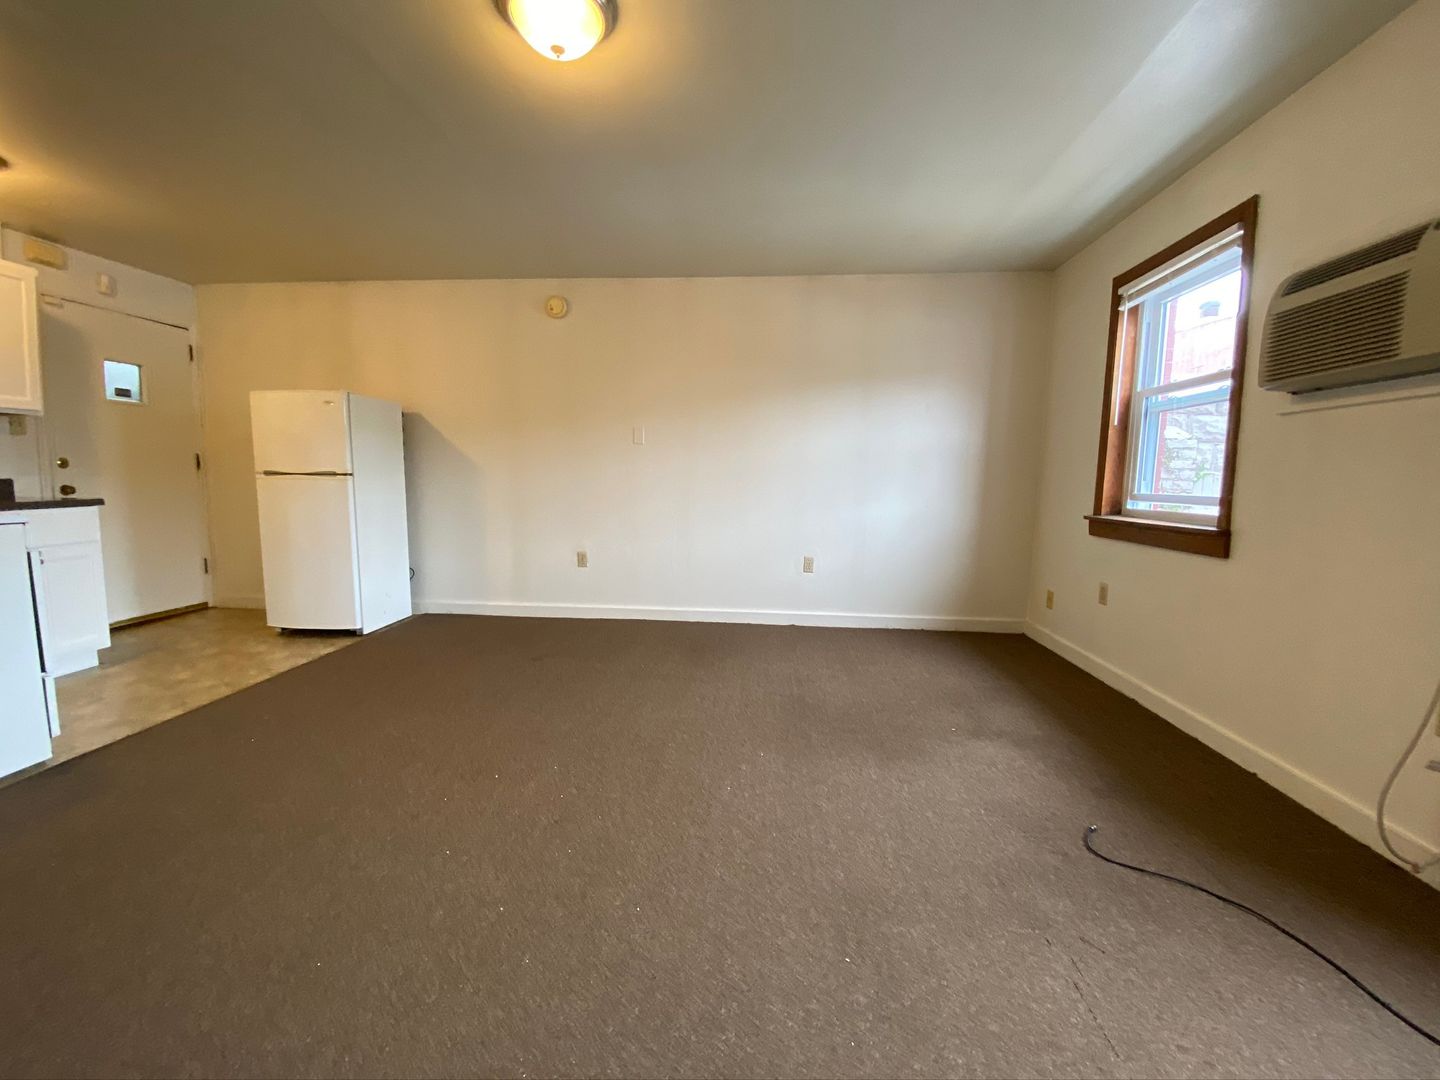 Fantastic Studio in S. Oakland!! Call Today to Schedule a Tour!!